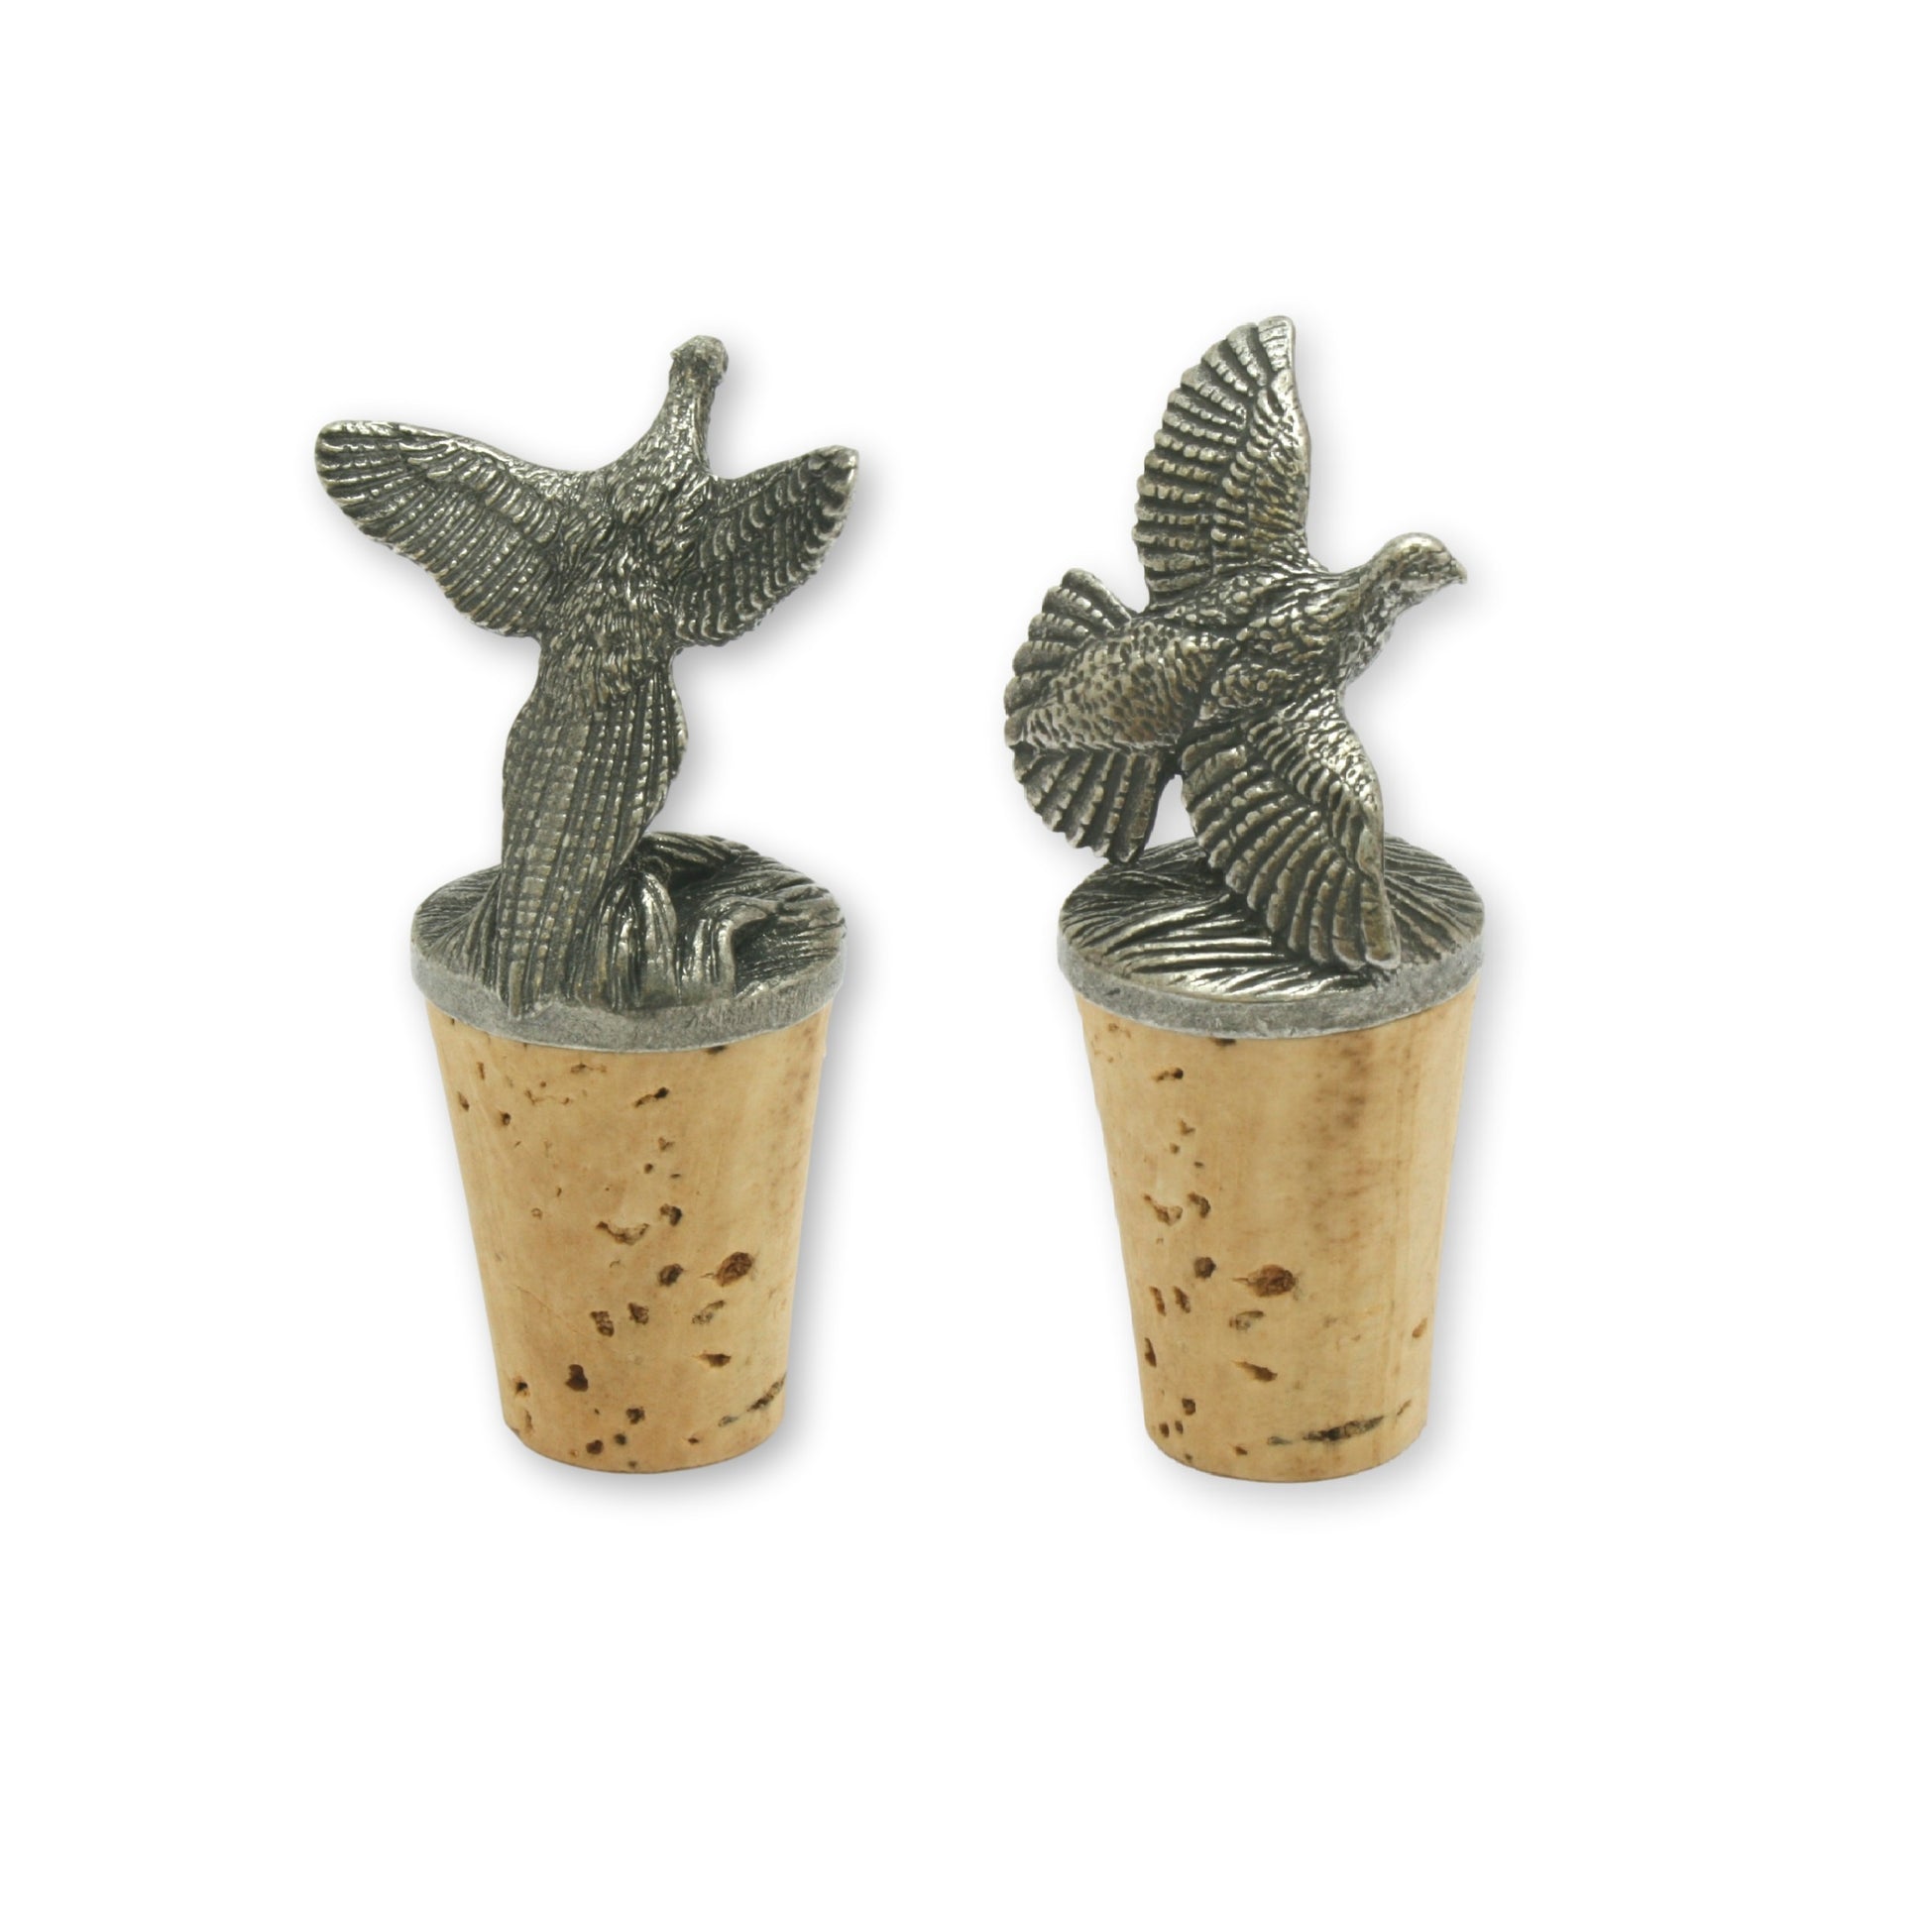 Pheasant and Partridge Wine Stopper